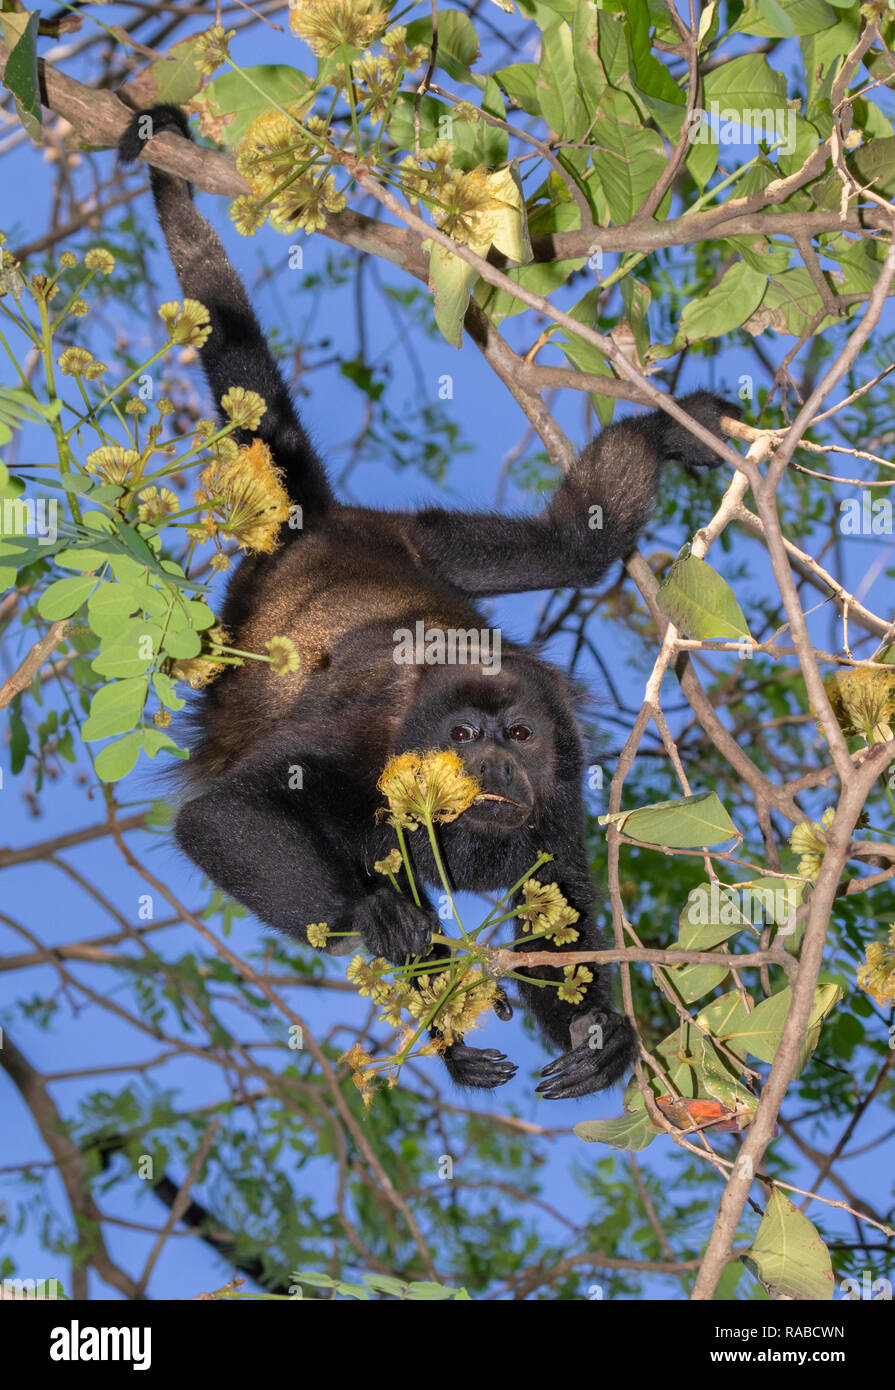 Mantled howler monkey (Alouatta palliata) hanging in a tree and eating young leaves and flowers in the canopy of rain forest, Puntarenas, Costa Rica Stock Photo